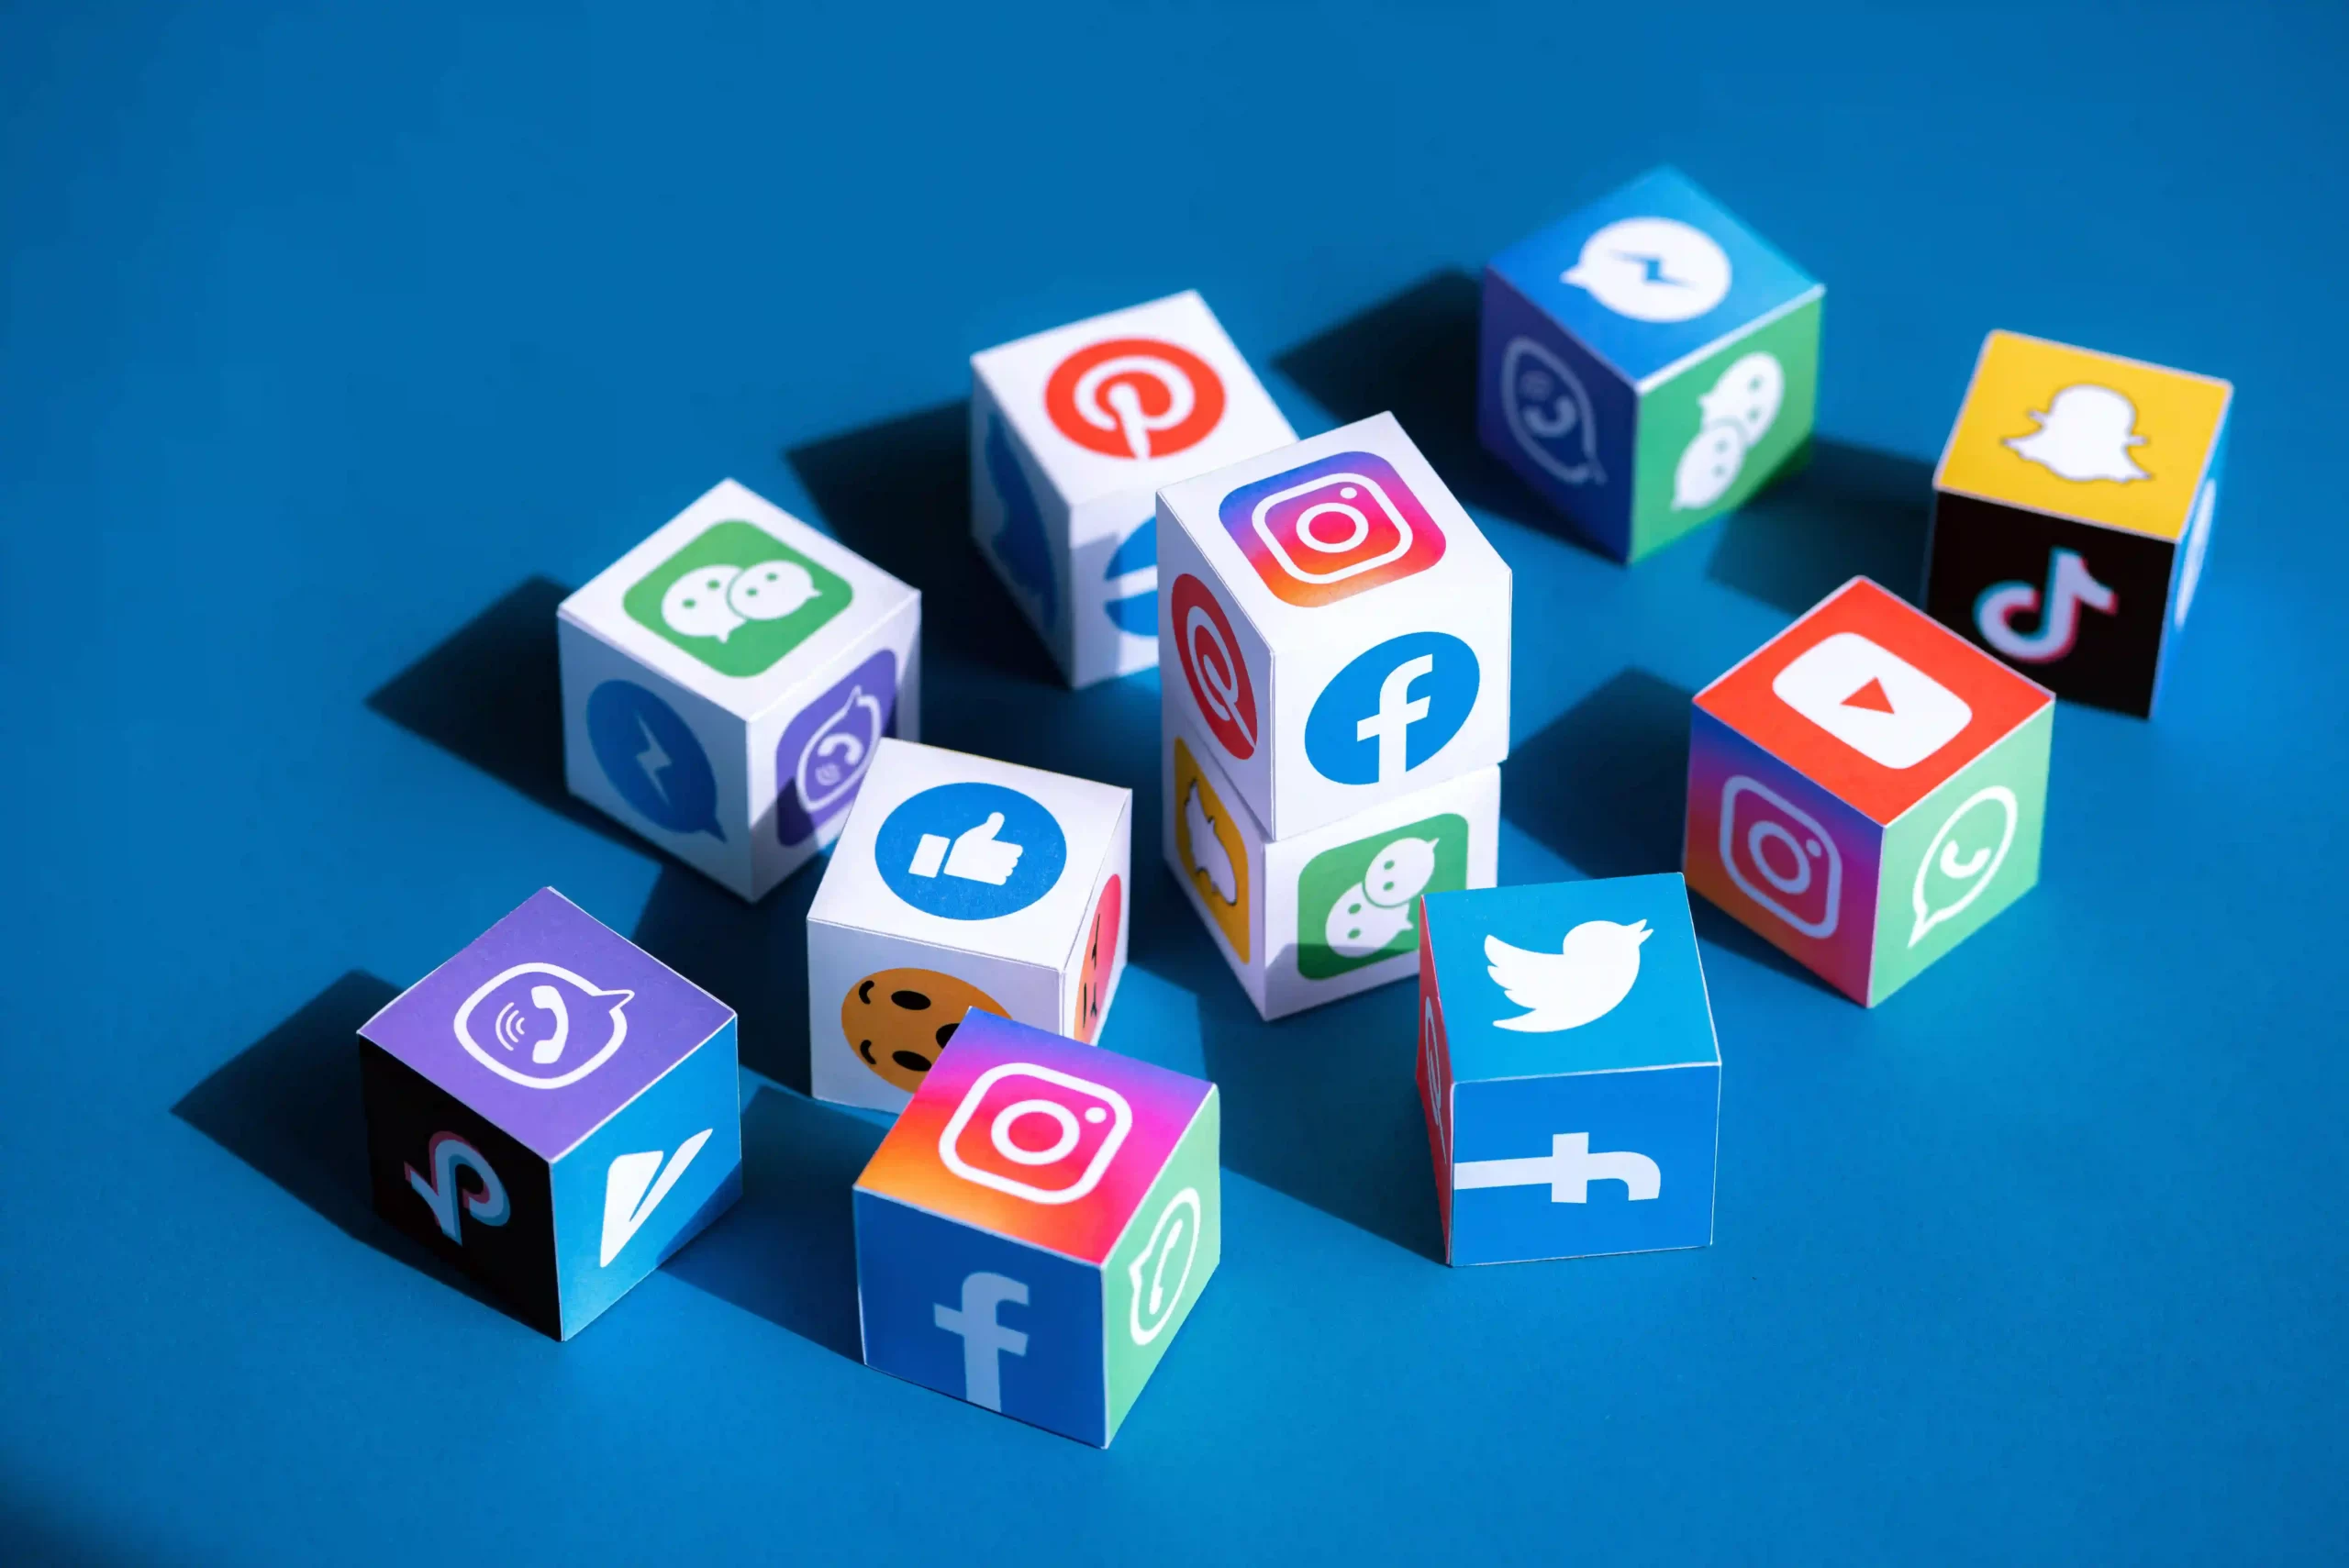 Social media apps logotypes printed on cubes, blue background.